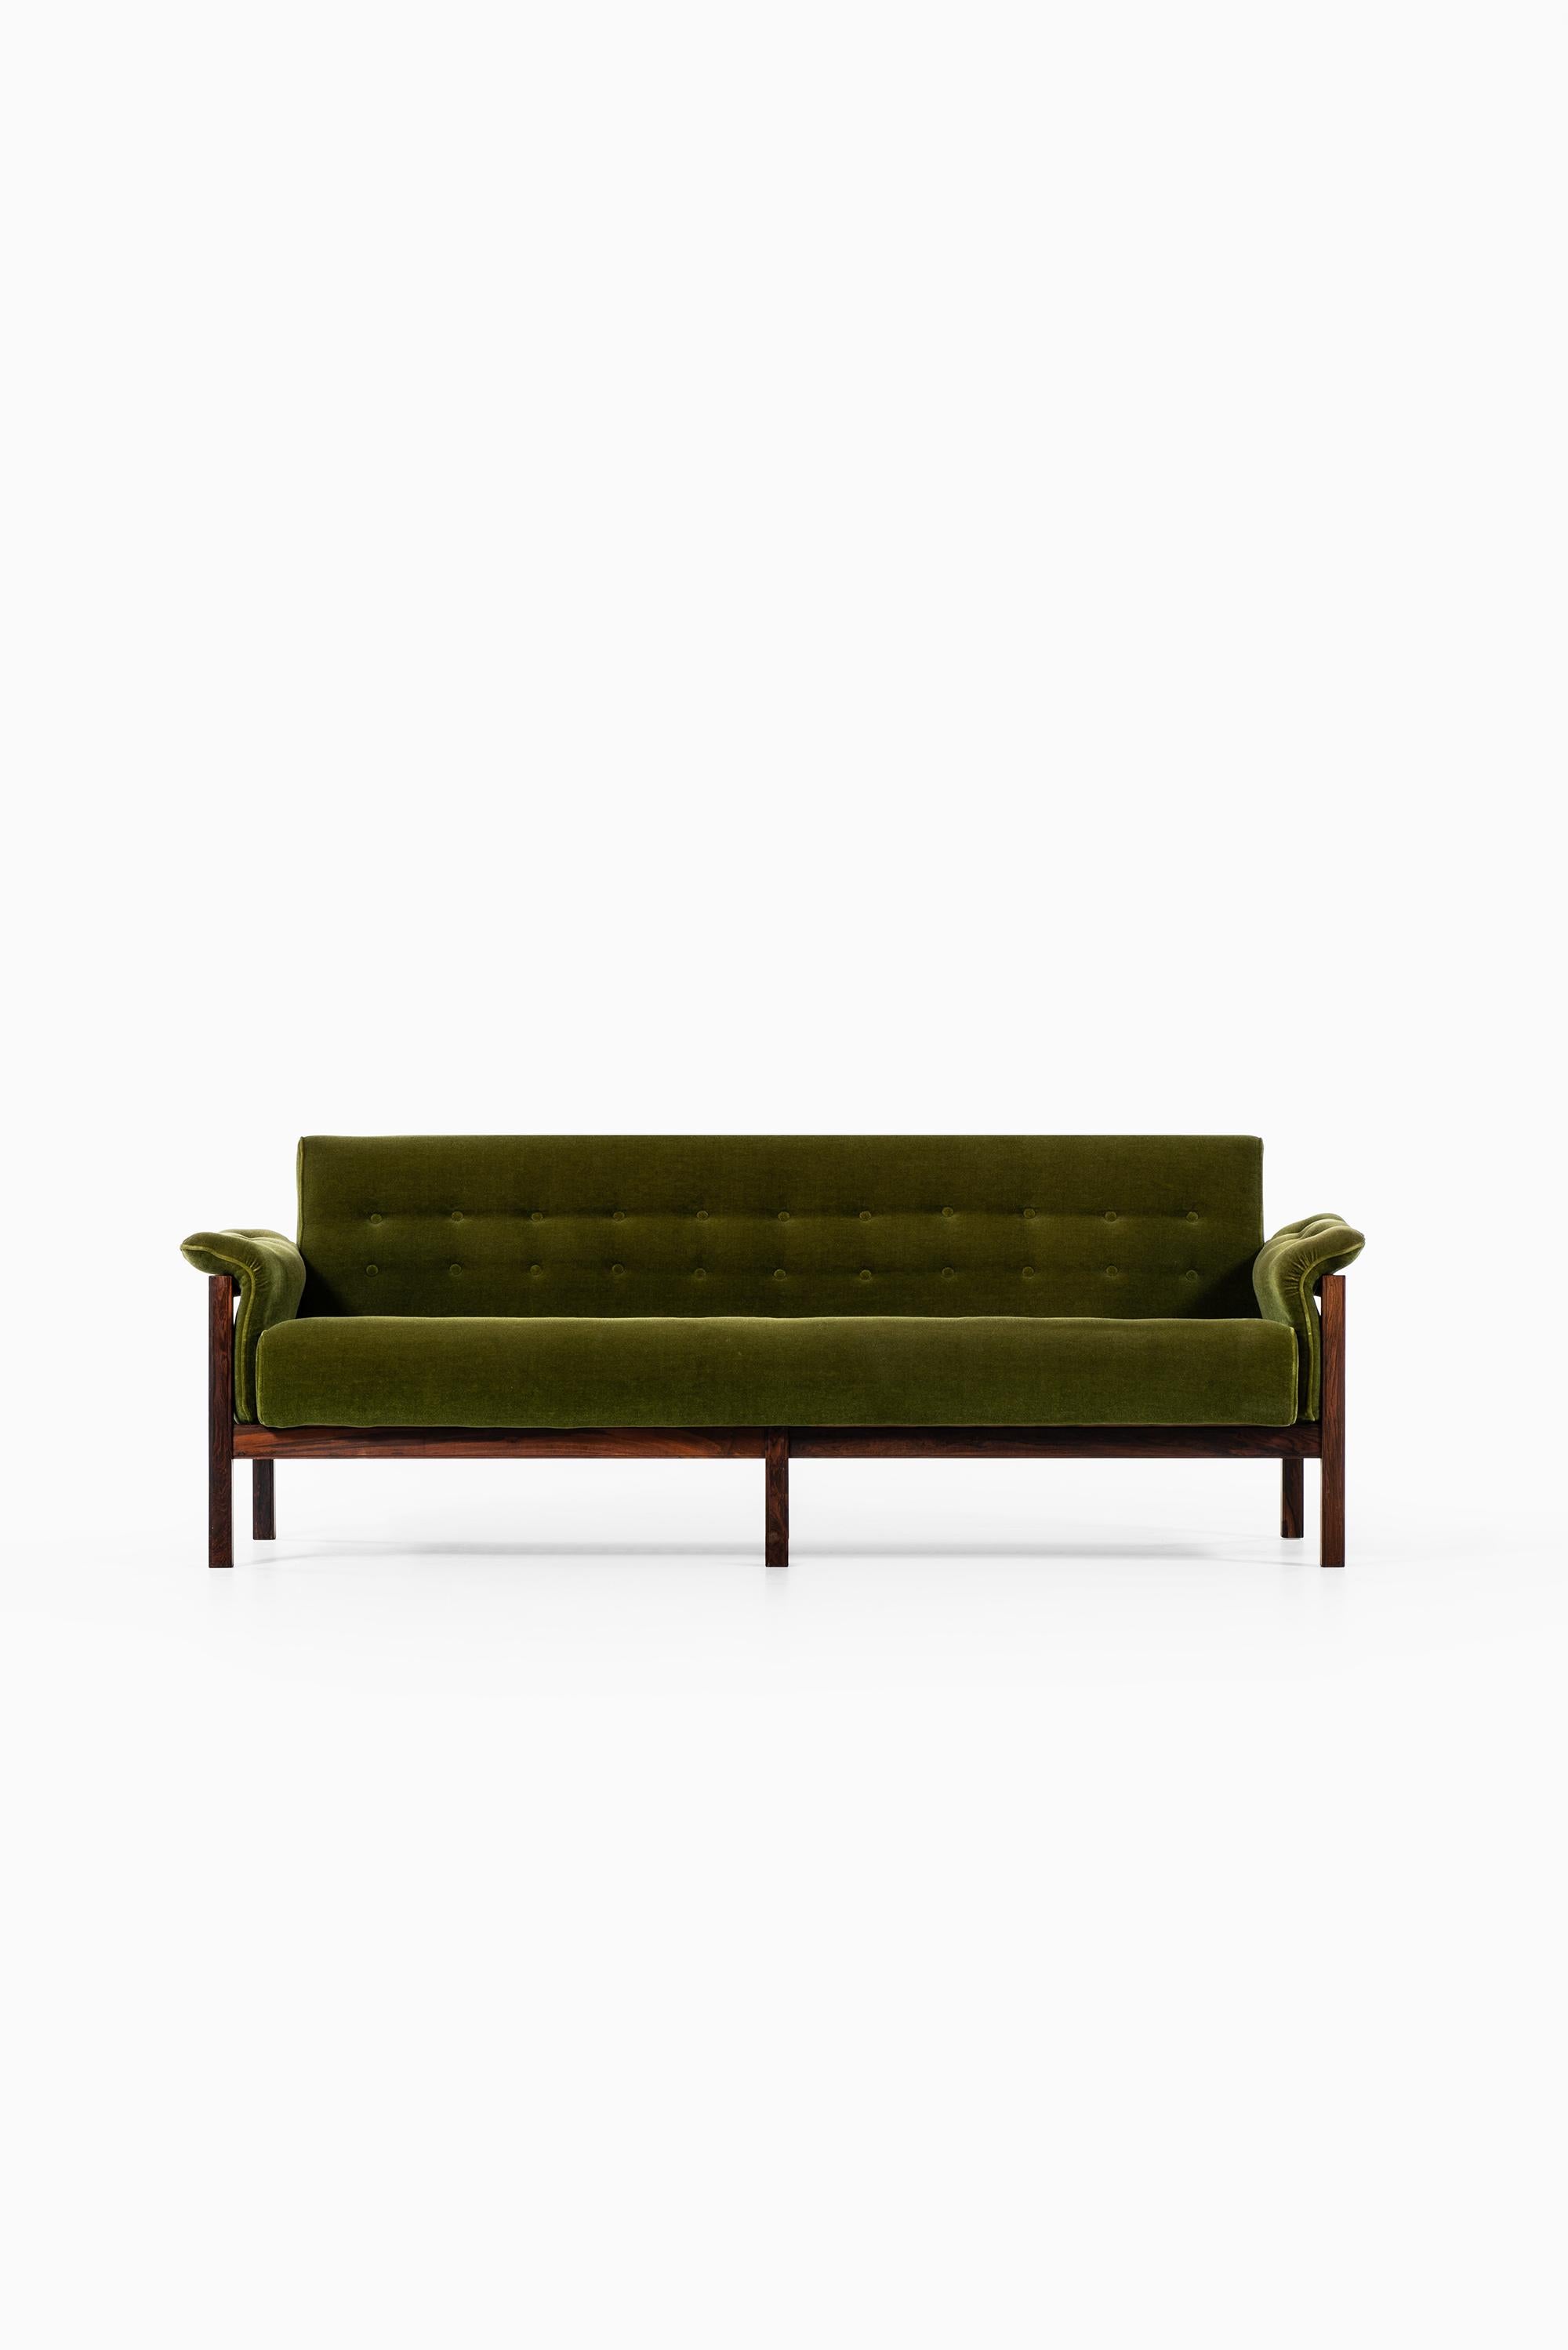 Sofa attributed to Percival Later. Probably produced by Lafer MP in Brazil.